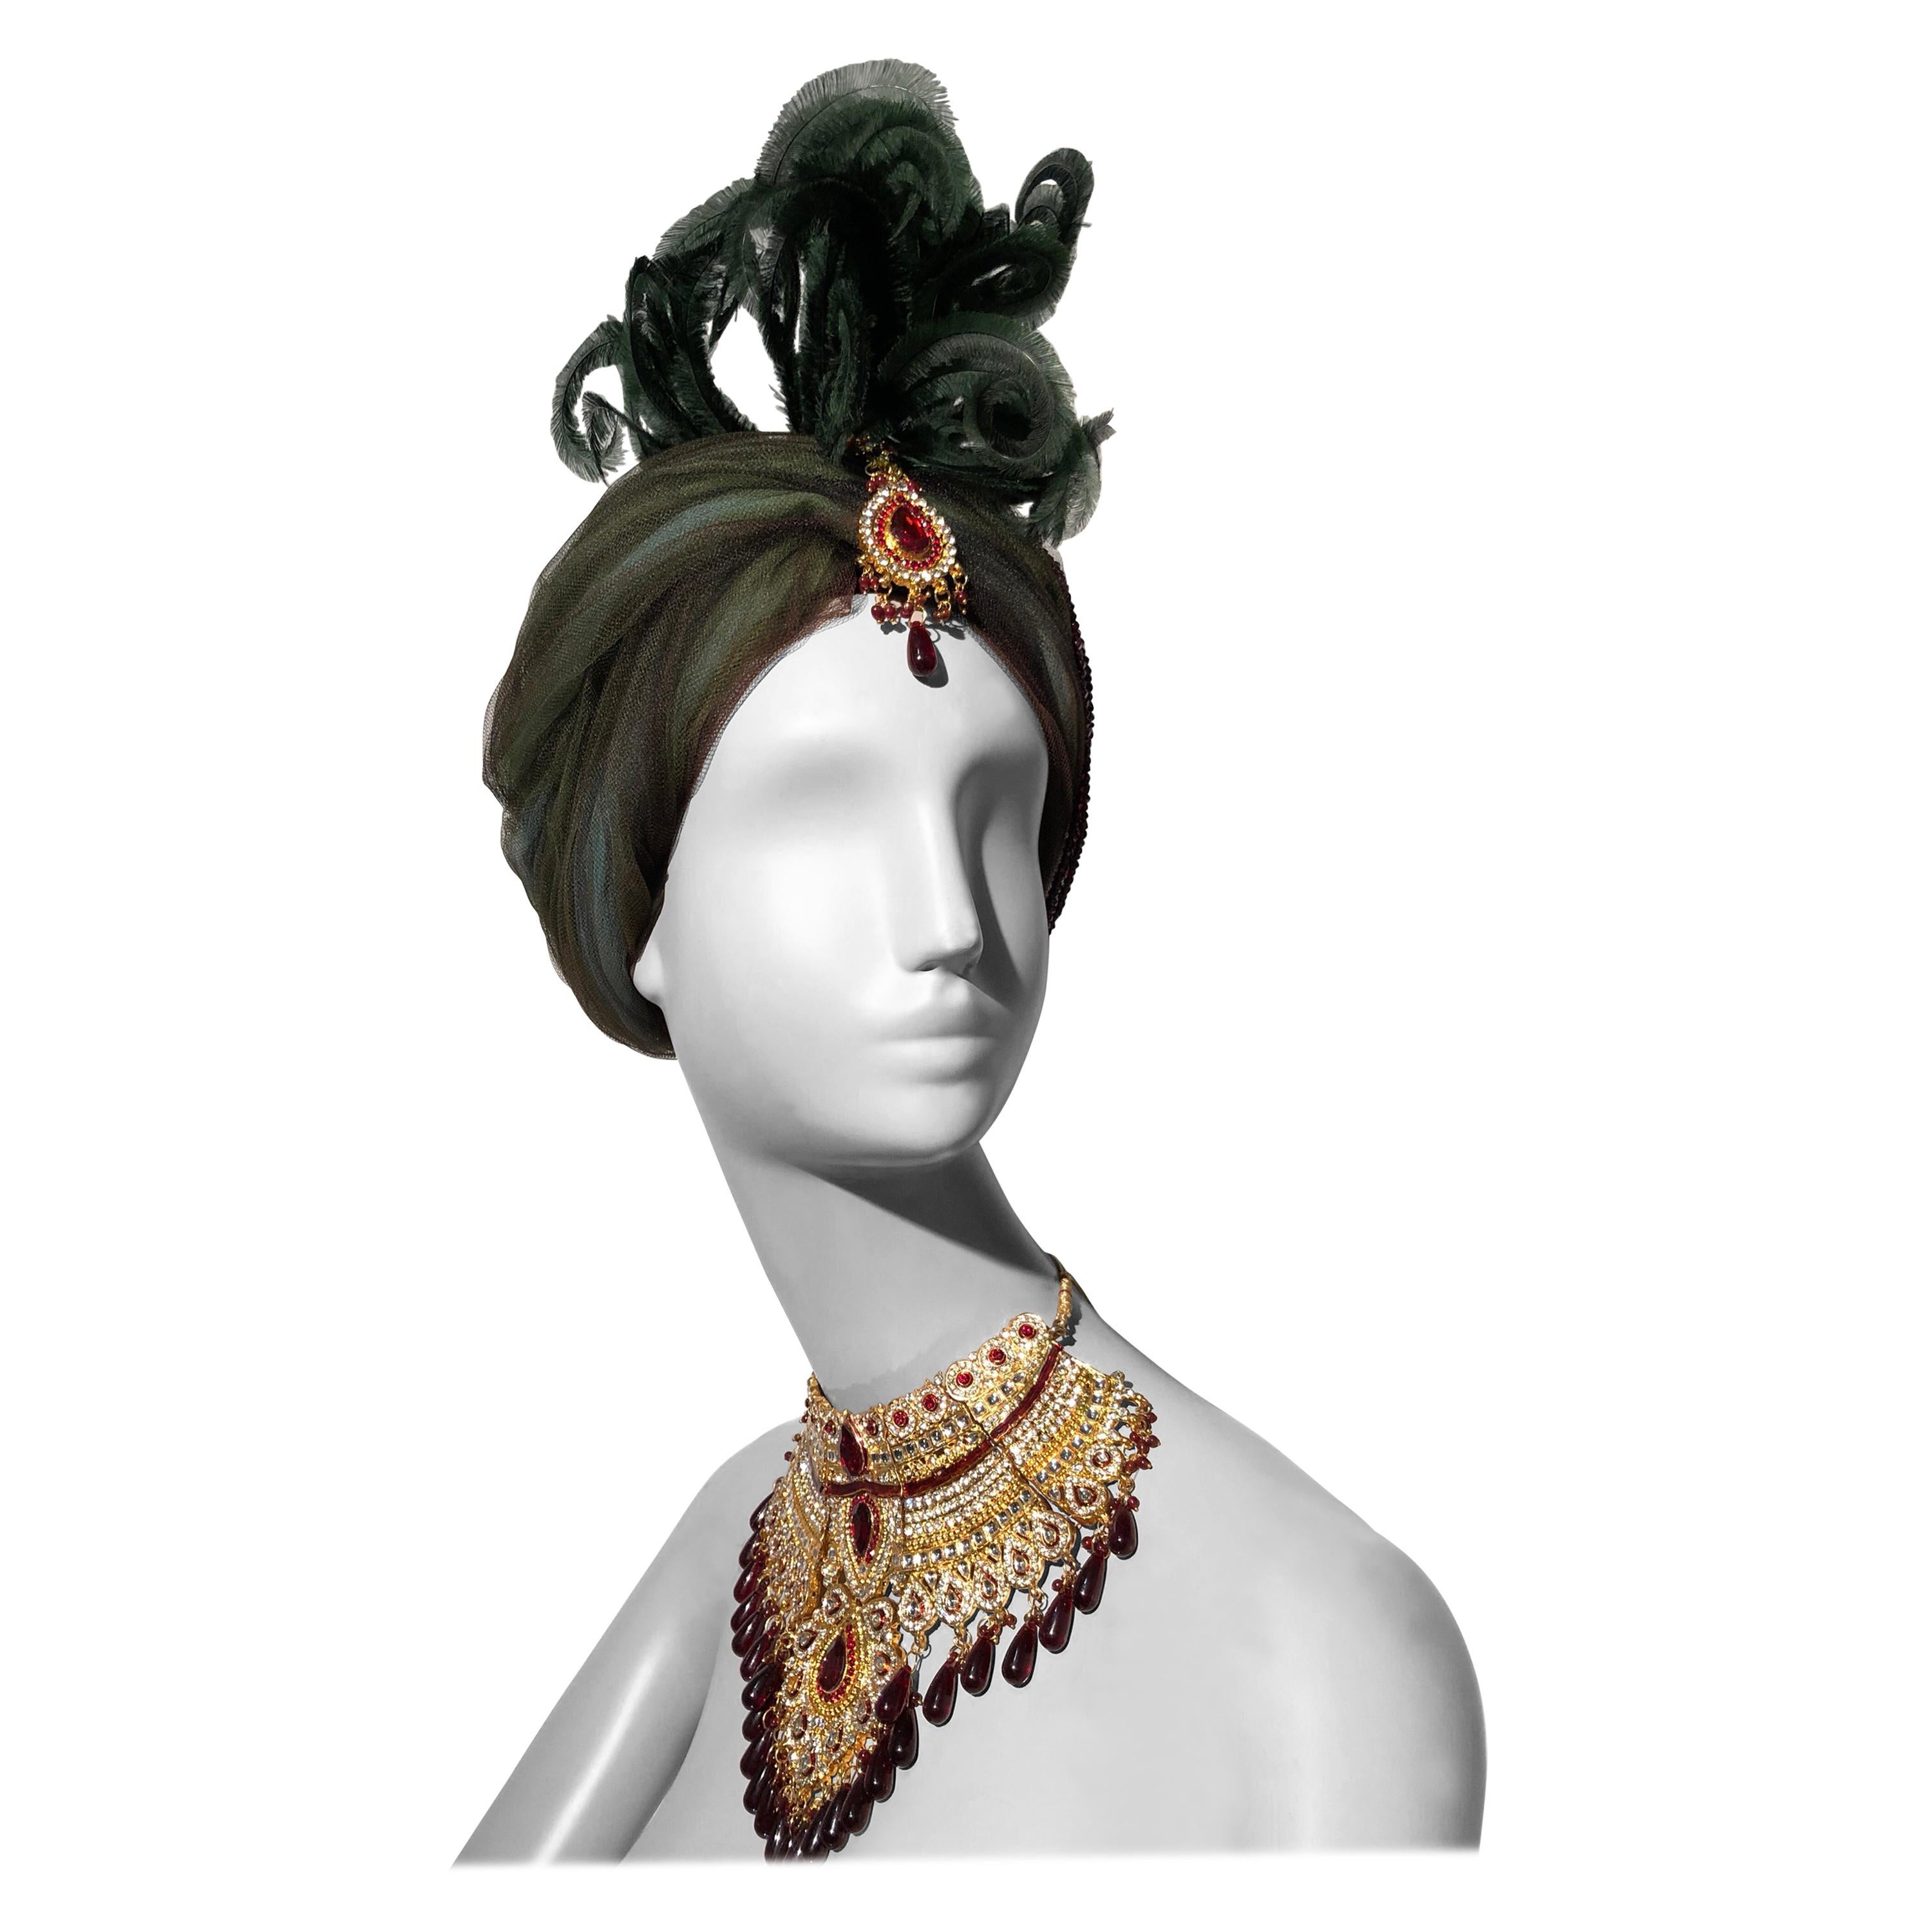 Tulle Turban With Curled Feathers and Authentic Indian Bib Necklace, 1960s 